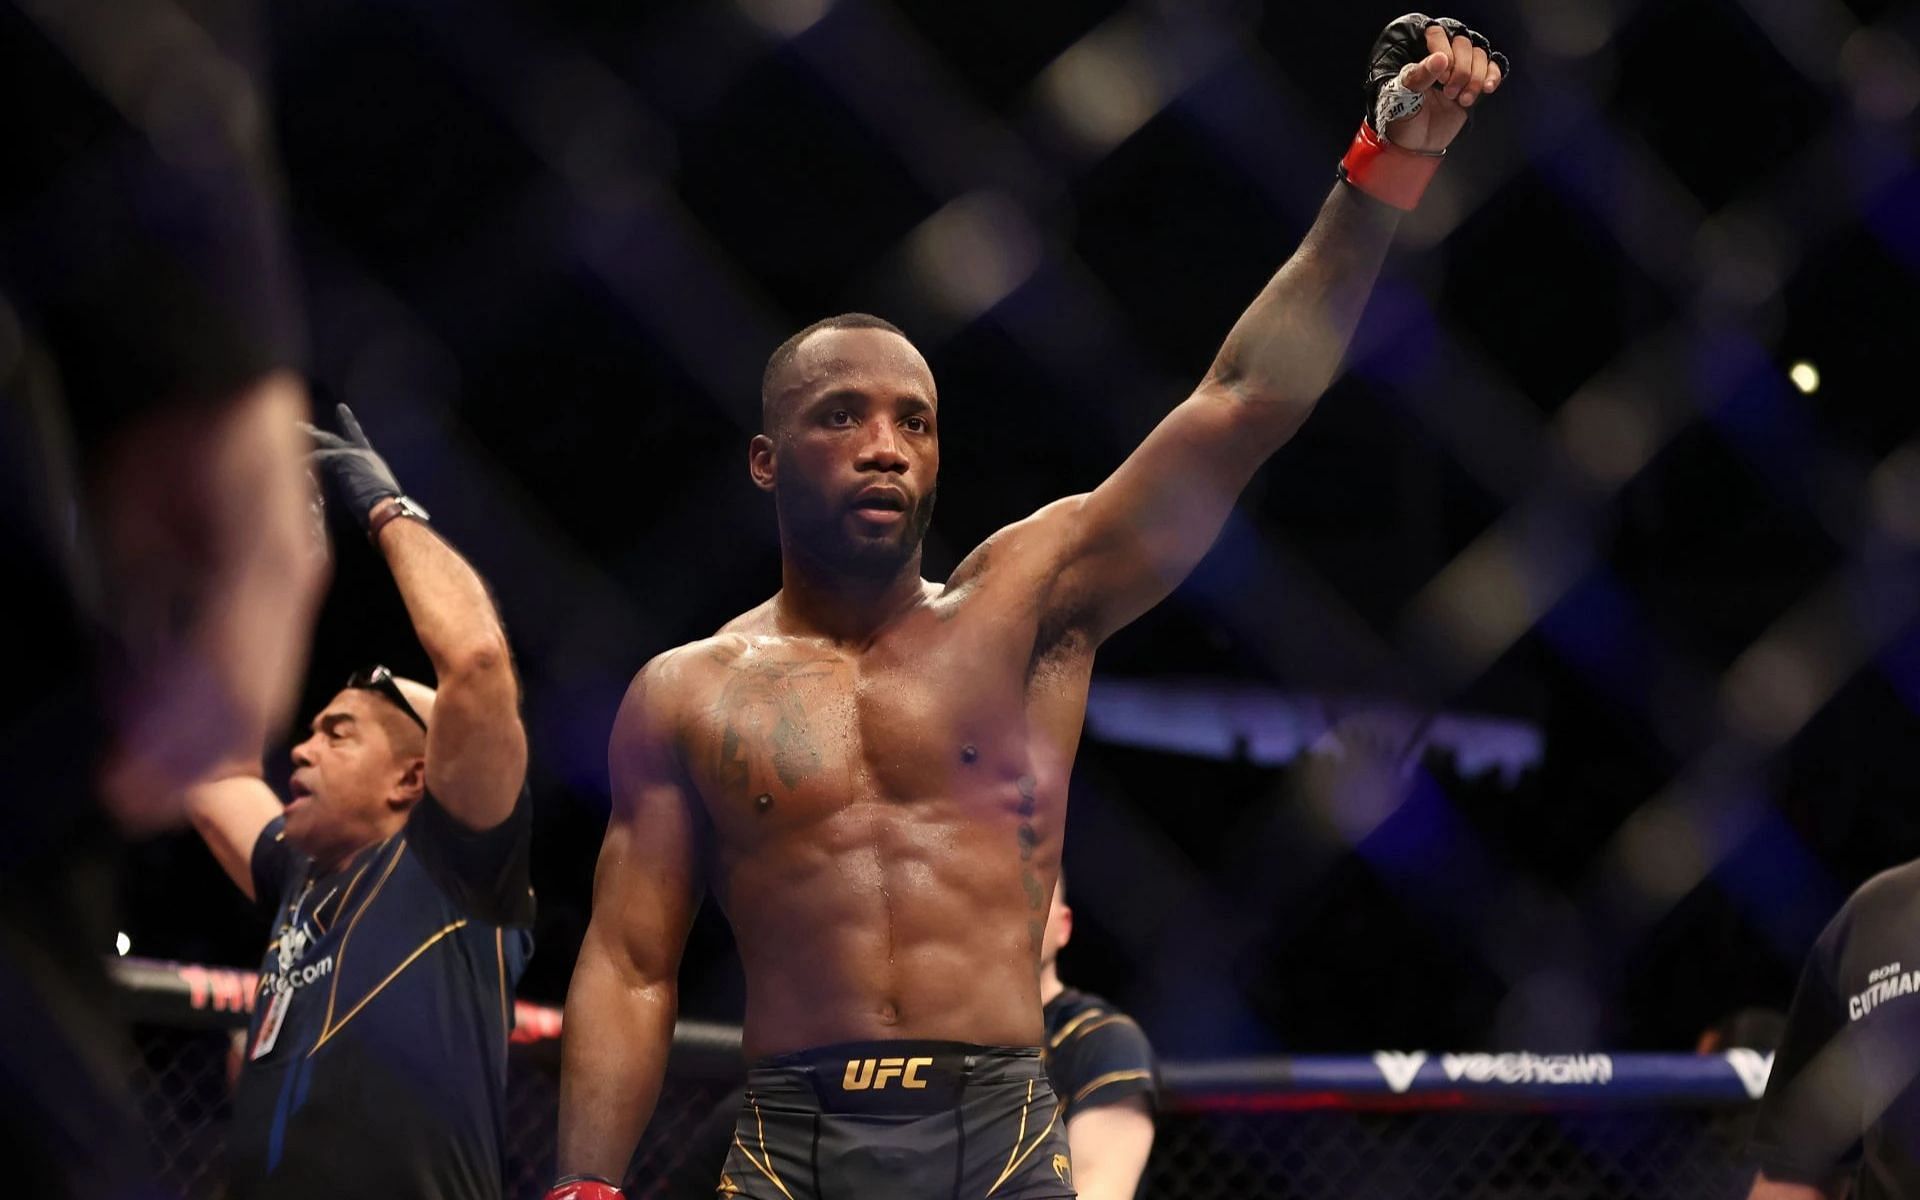 Leon Edwards upset Kamaru Usman in their first title bout - but clearly beat him in their rematch